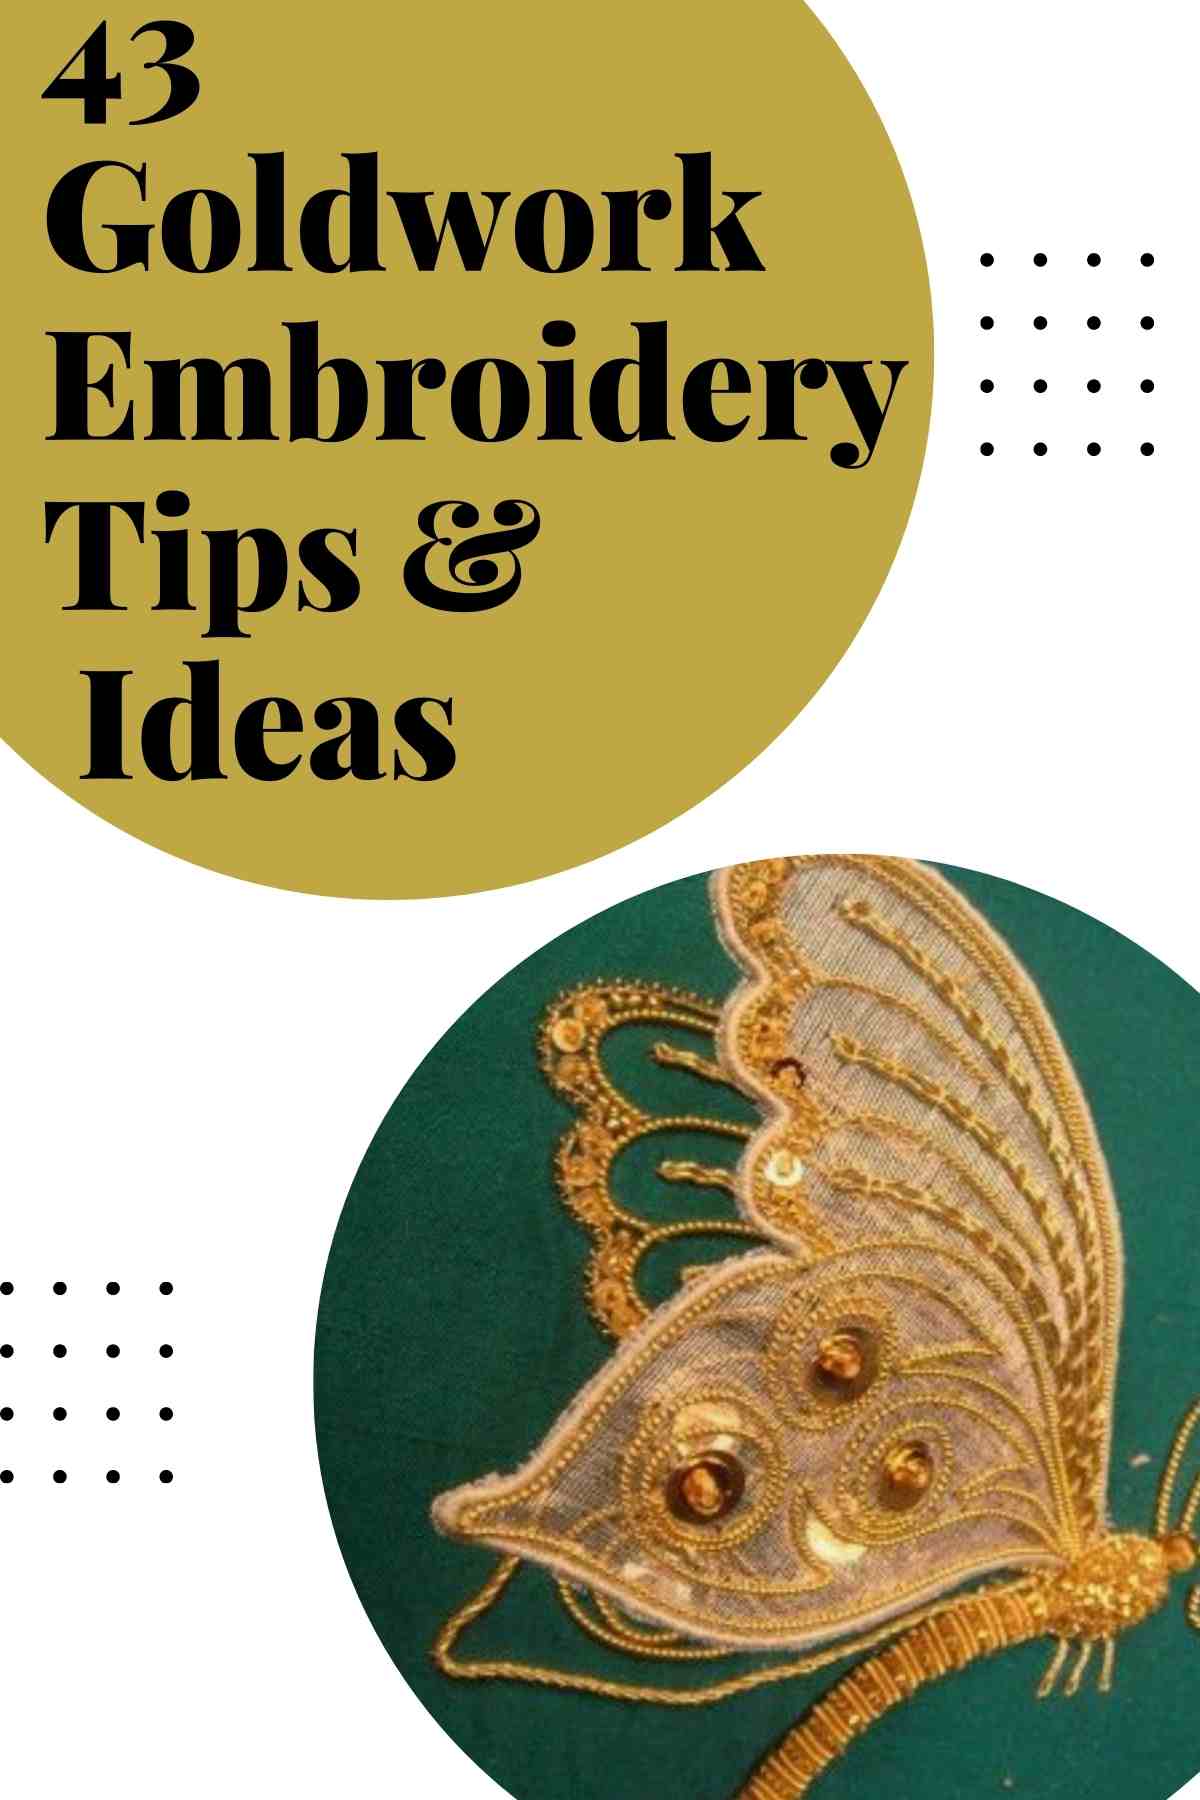 Goldwork Embroidery Tips & Ideas